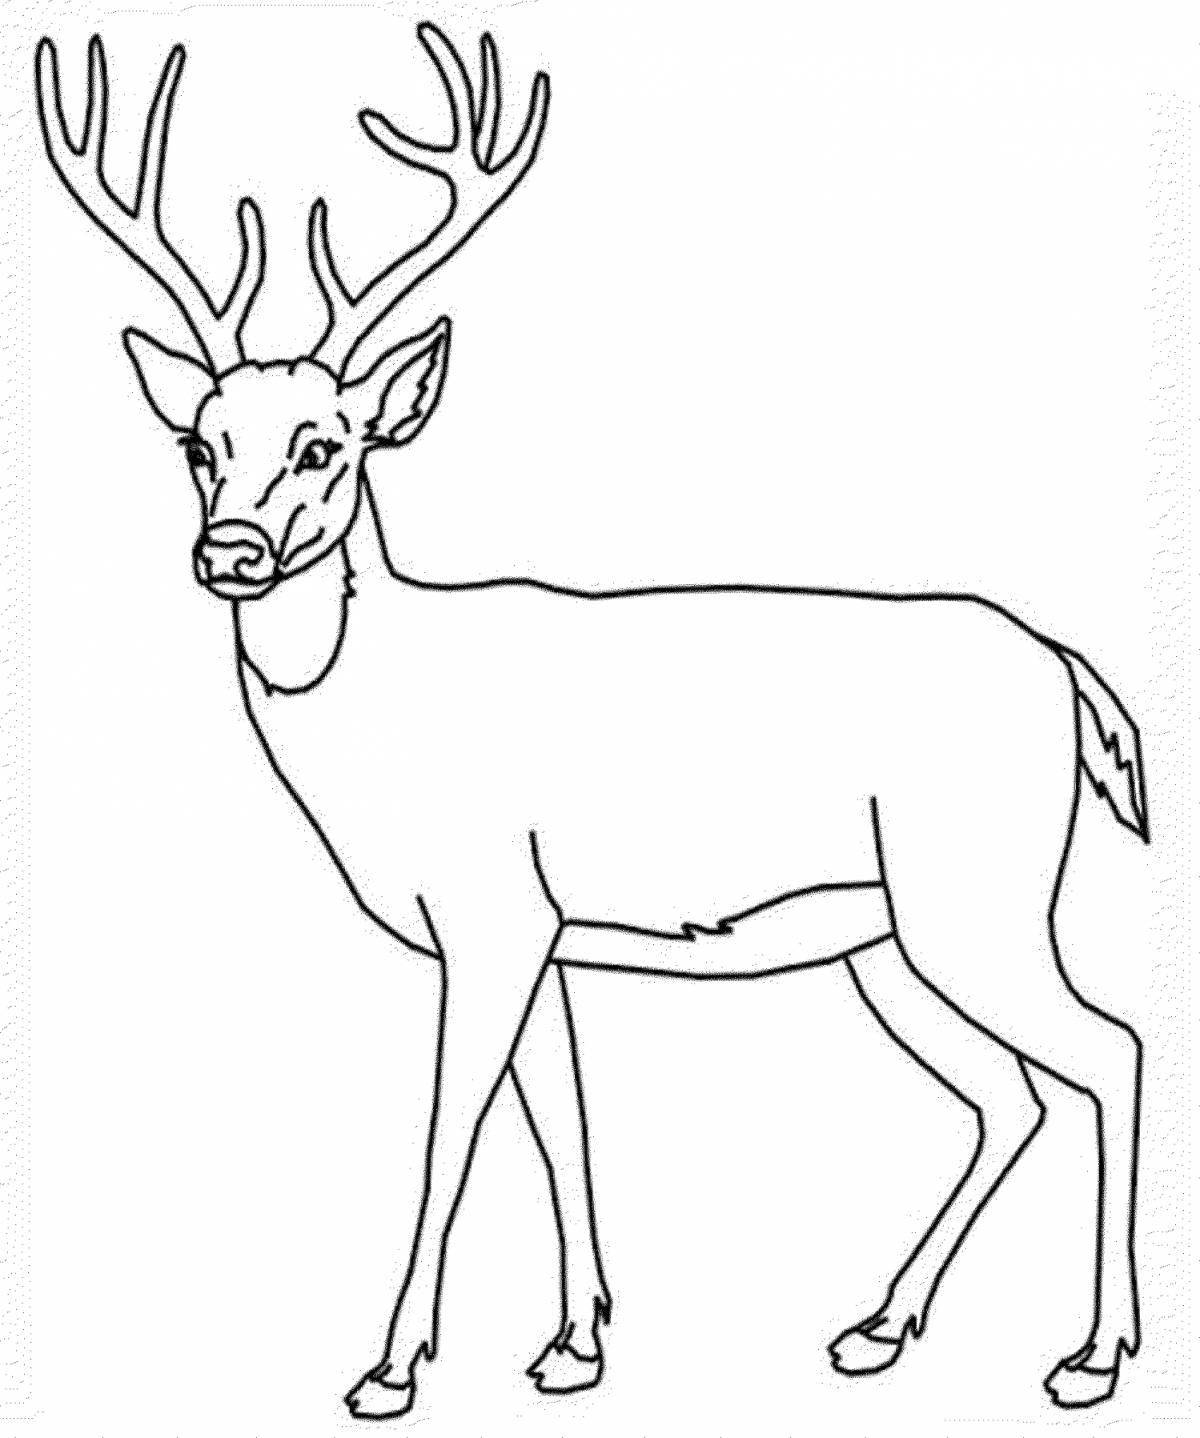 Animated drawing of a deer